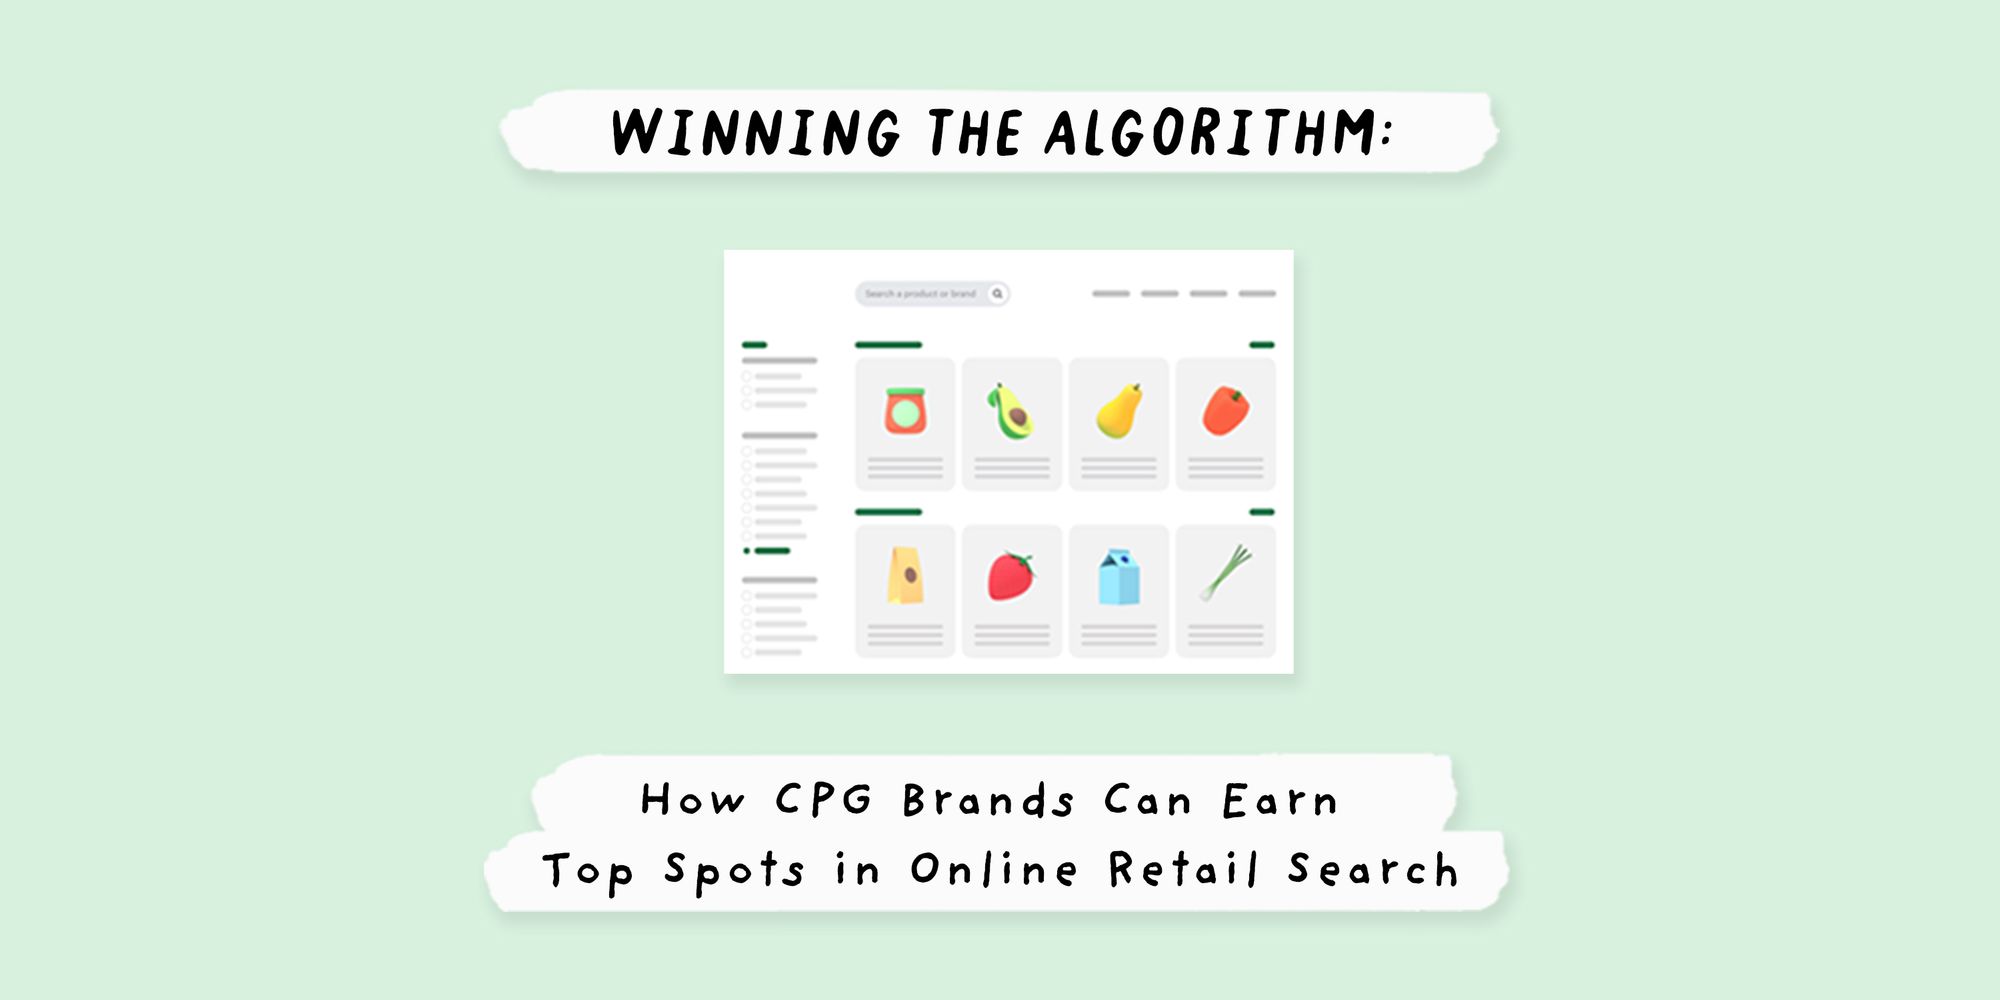 Winning the algorithm: How CPG brands can earn top spots in online retail search